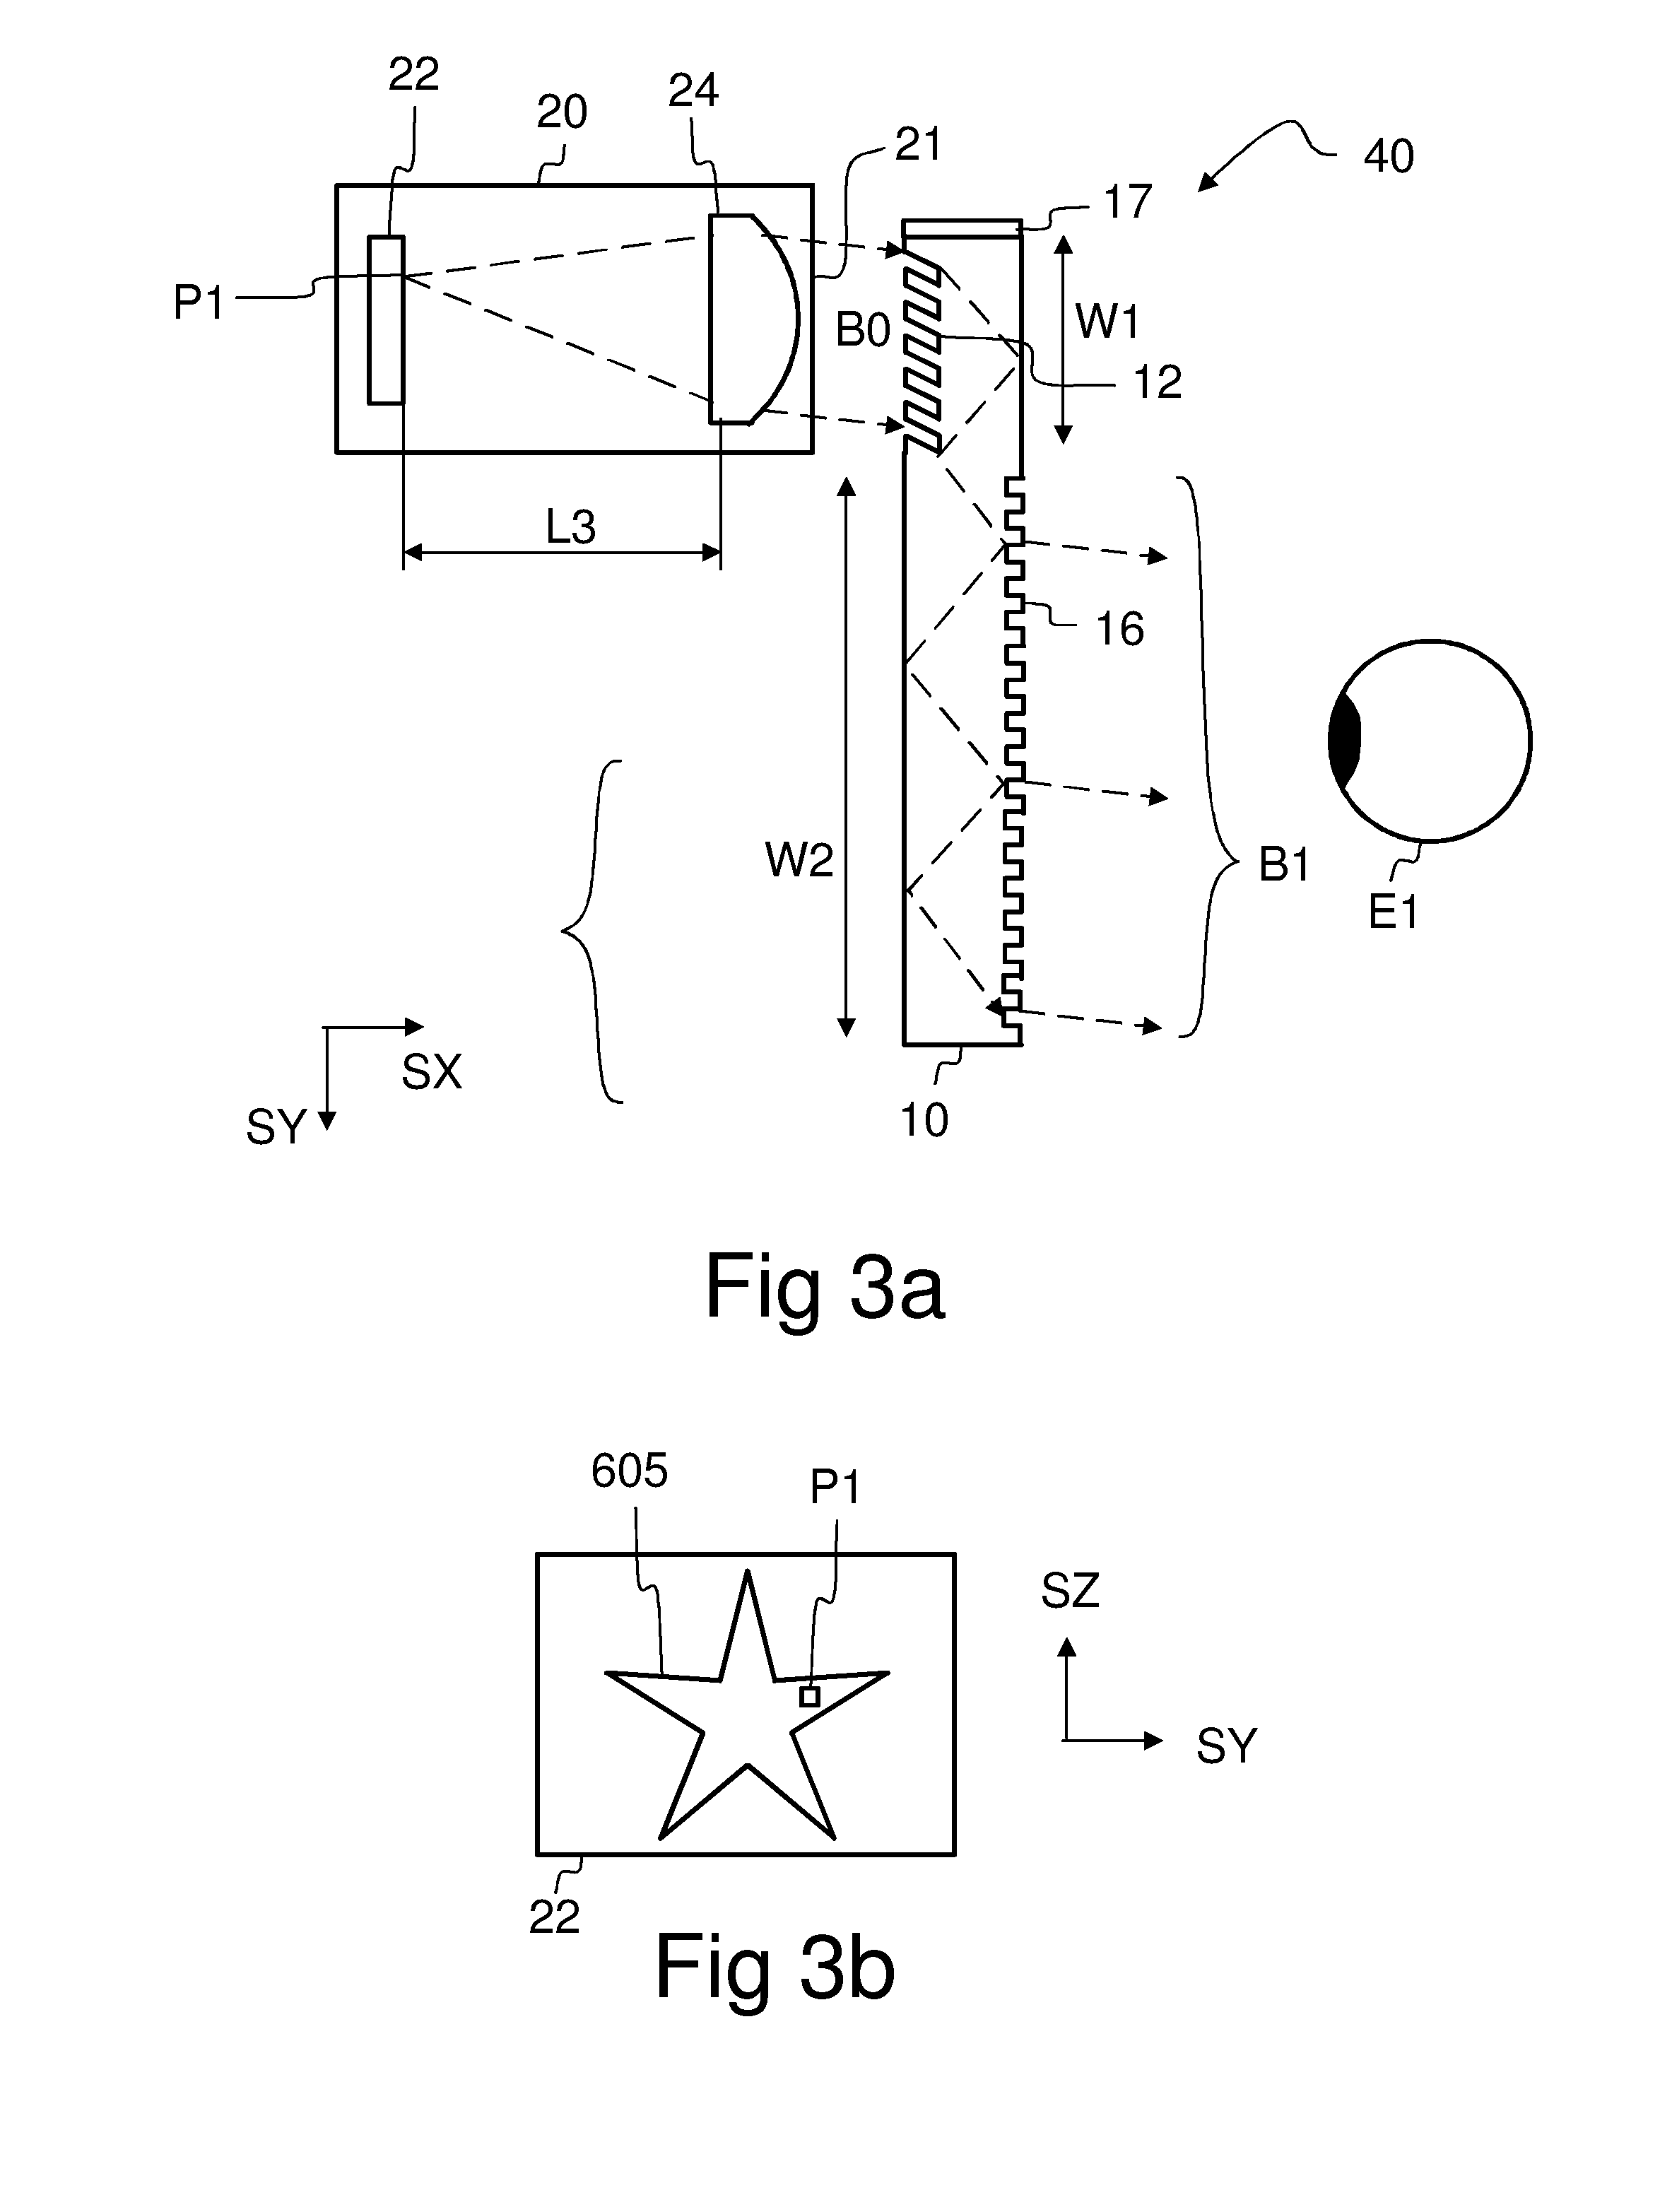 Display Device Having Two Operating Modes